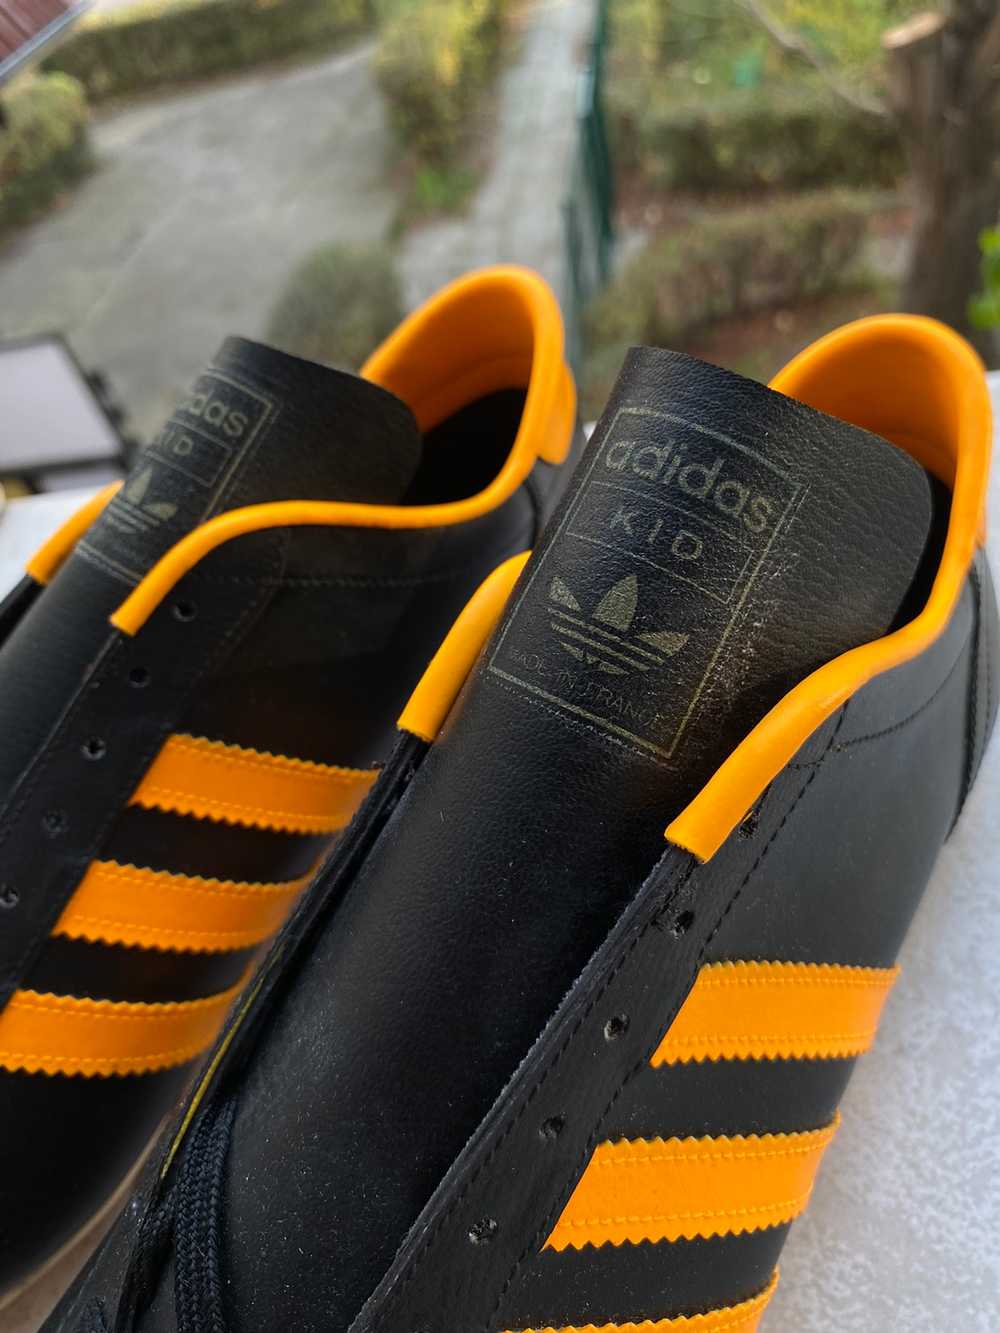 Adidas Kid made in France 70-80s football boots - image 4